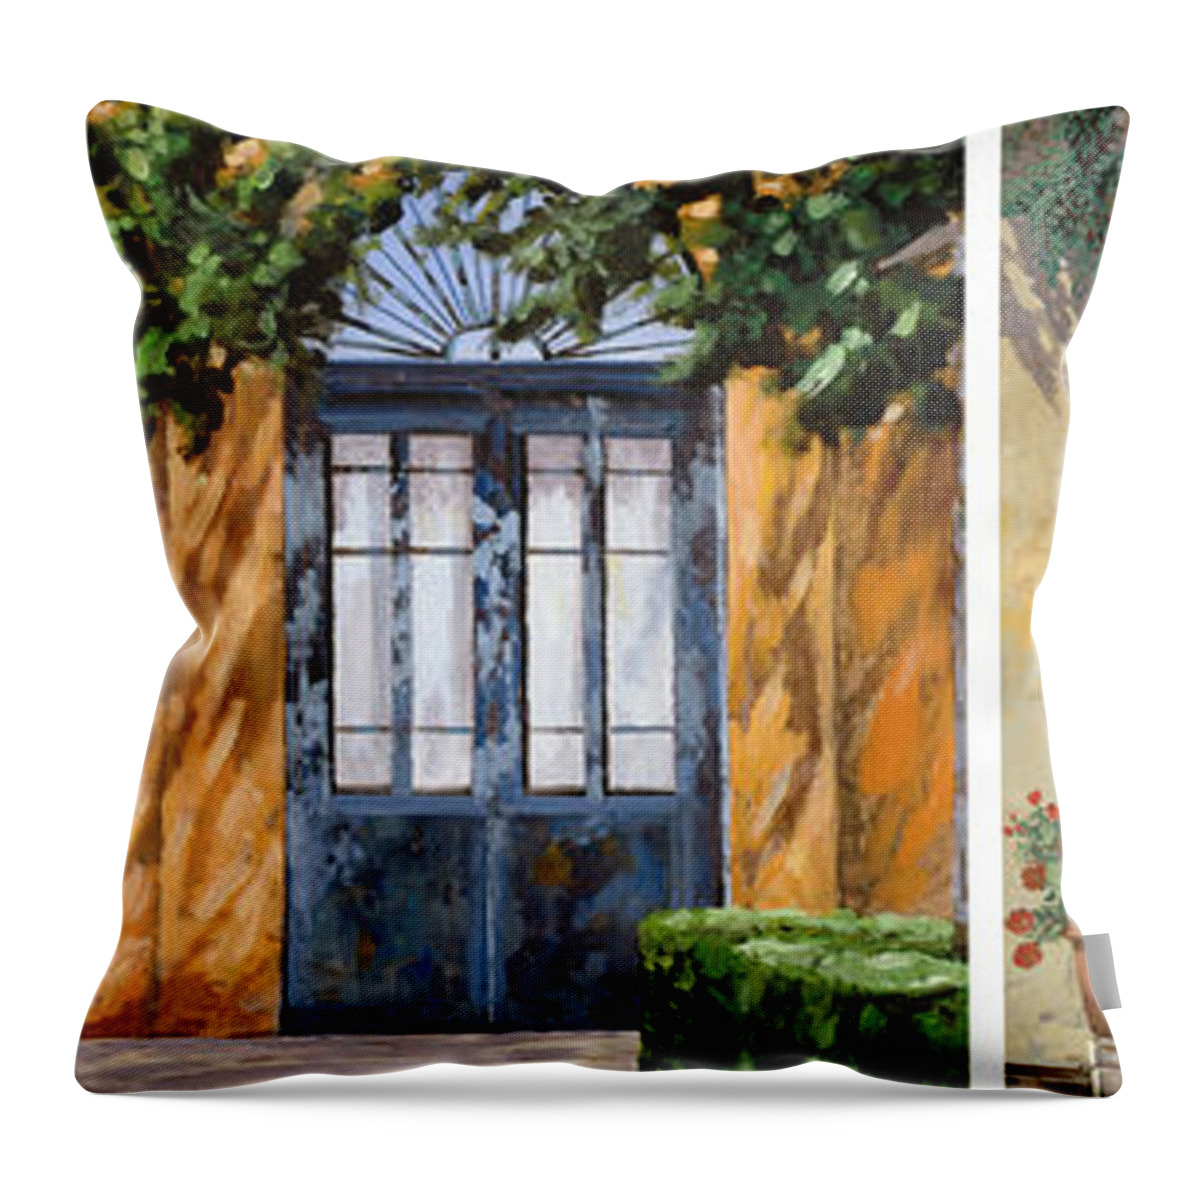 5 Doors Throw Pillow featuring the painting Le 5 Porte by Guido Borelli